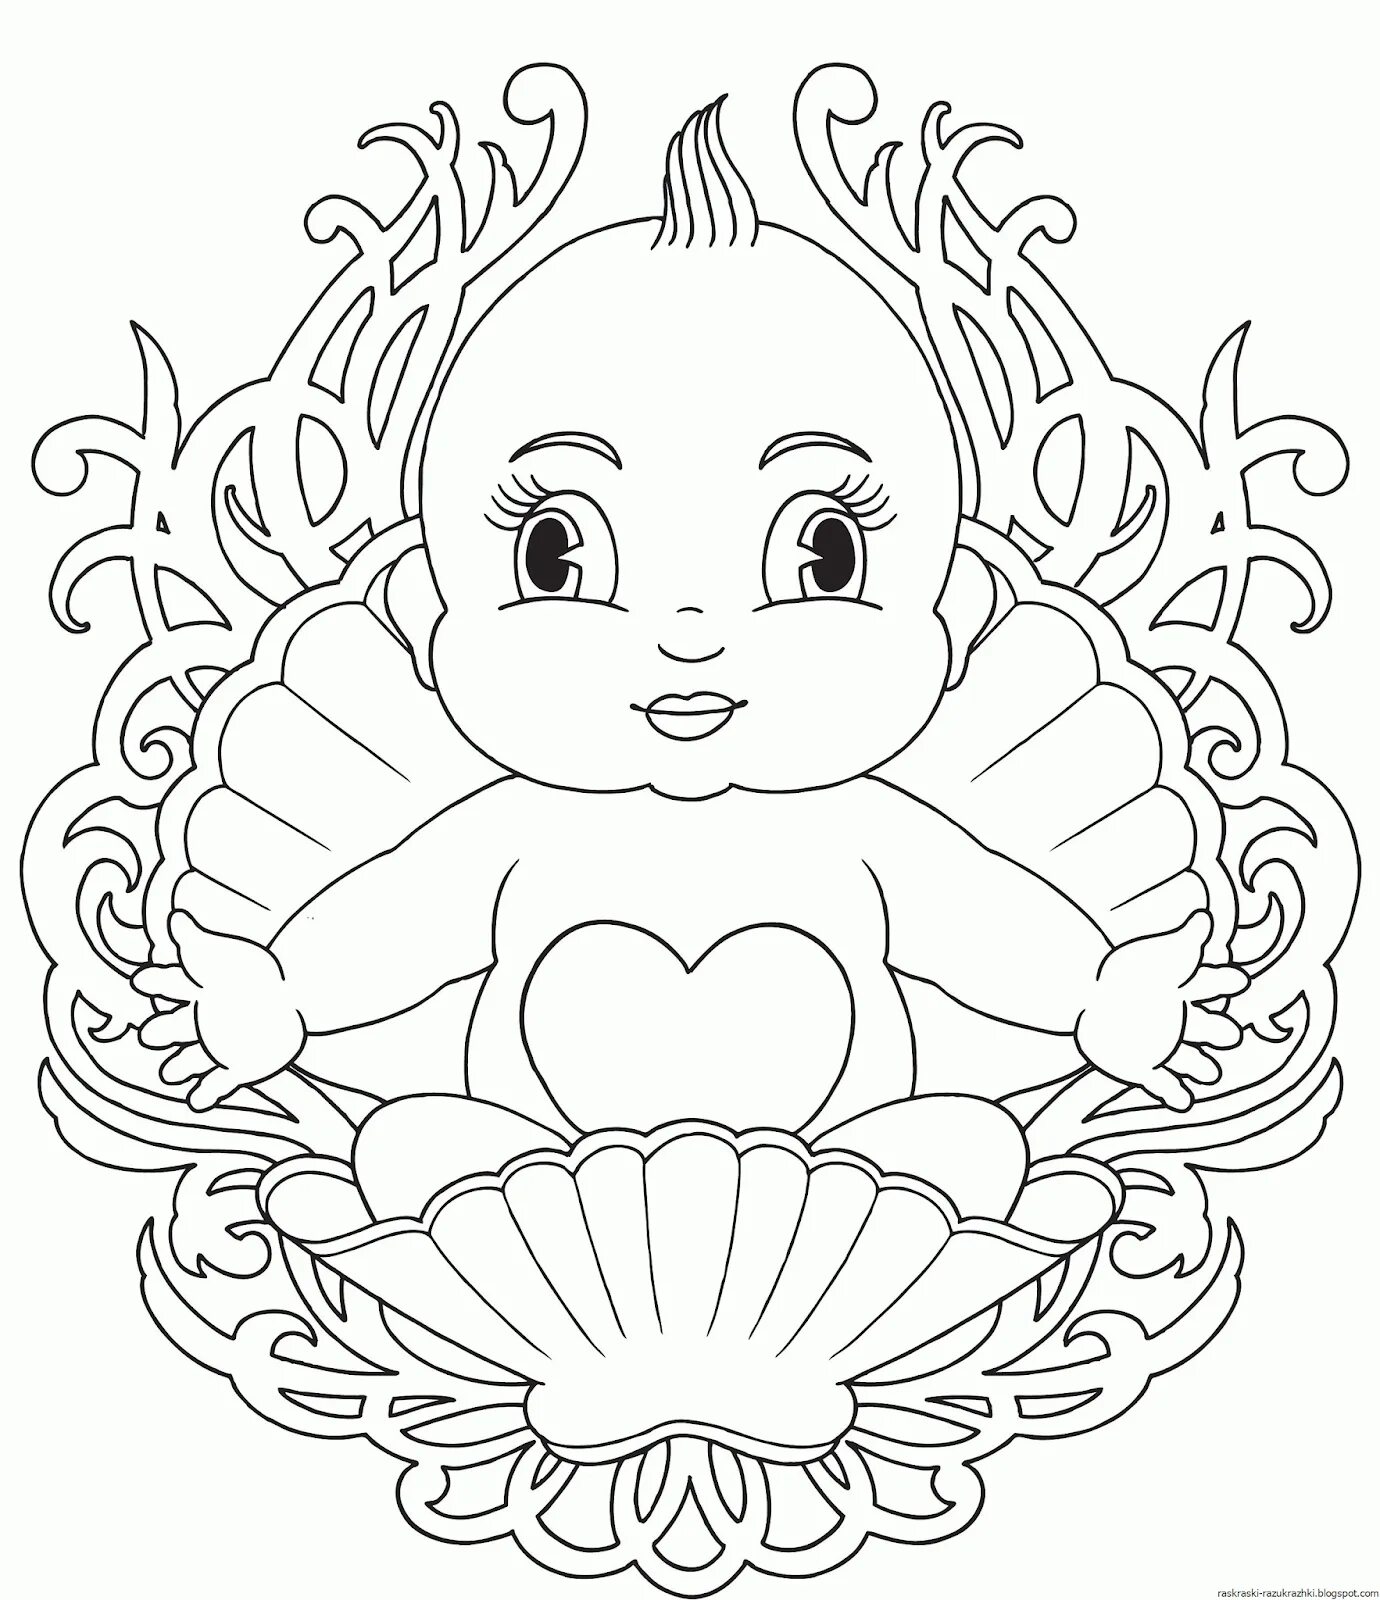 Radiant baby dolls coloring pages